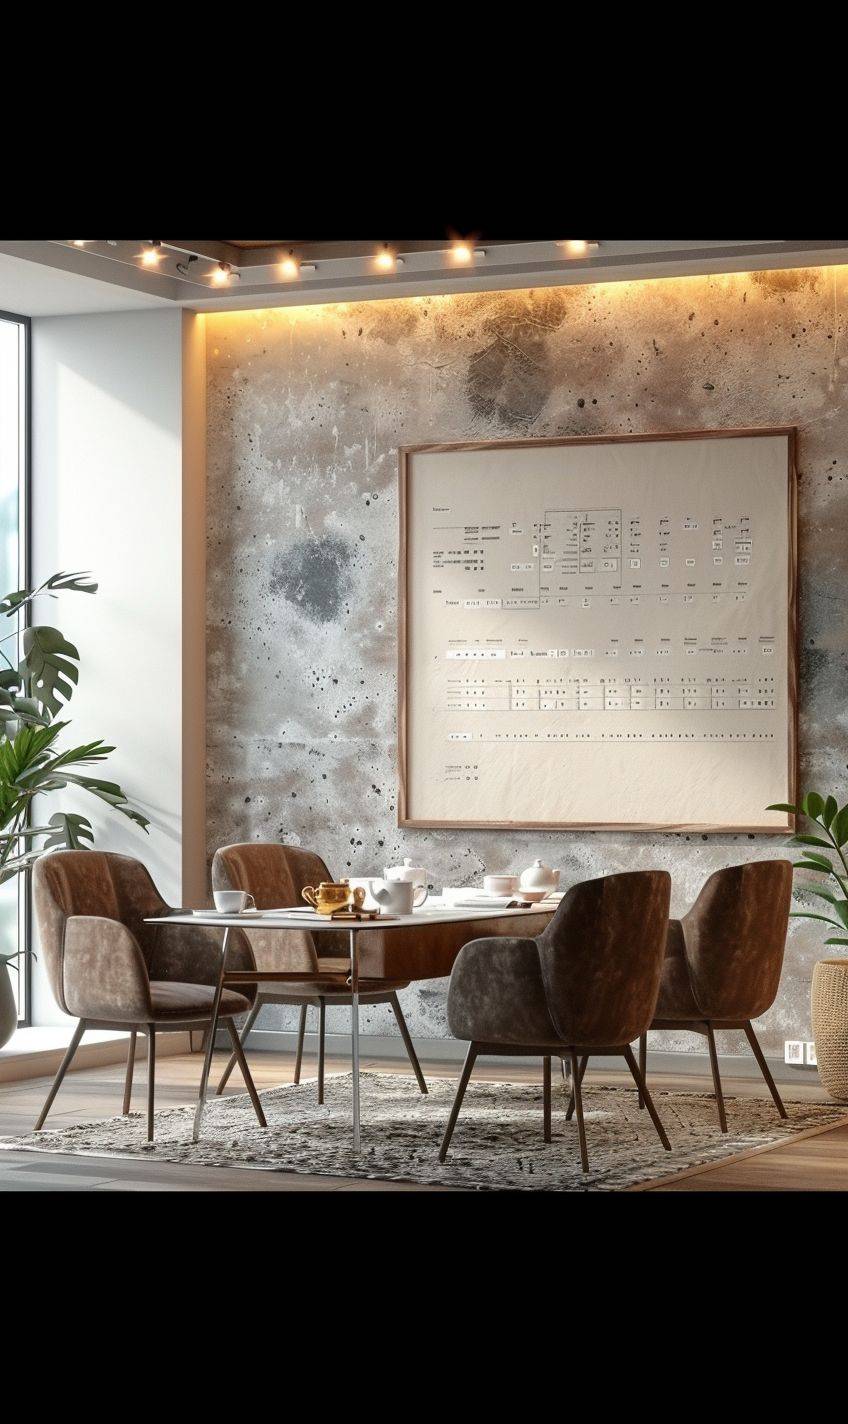 Realistic and minimalist company tea break area with a table in the foreground and a bulletin board in the background, modern high-class minimalist style, bright office environment, textured walls.